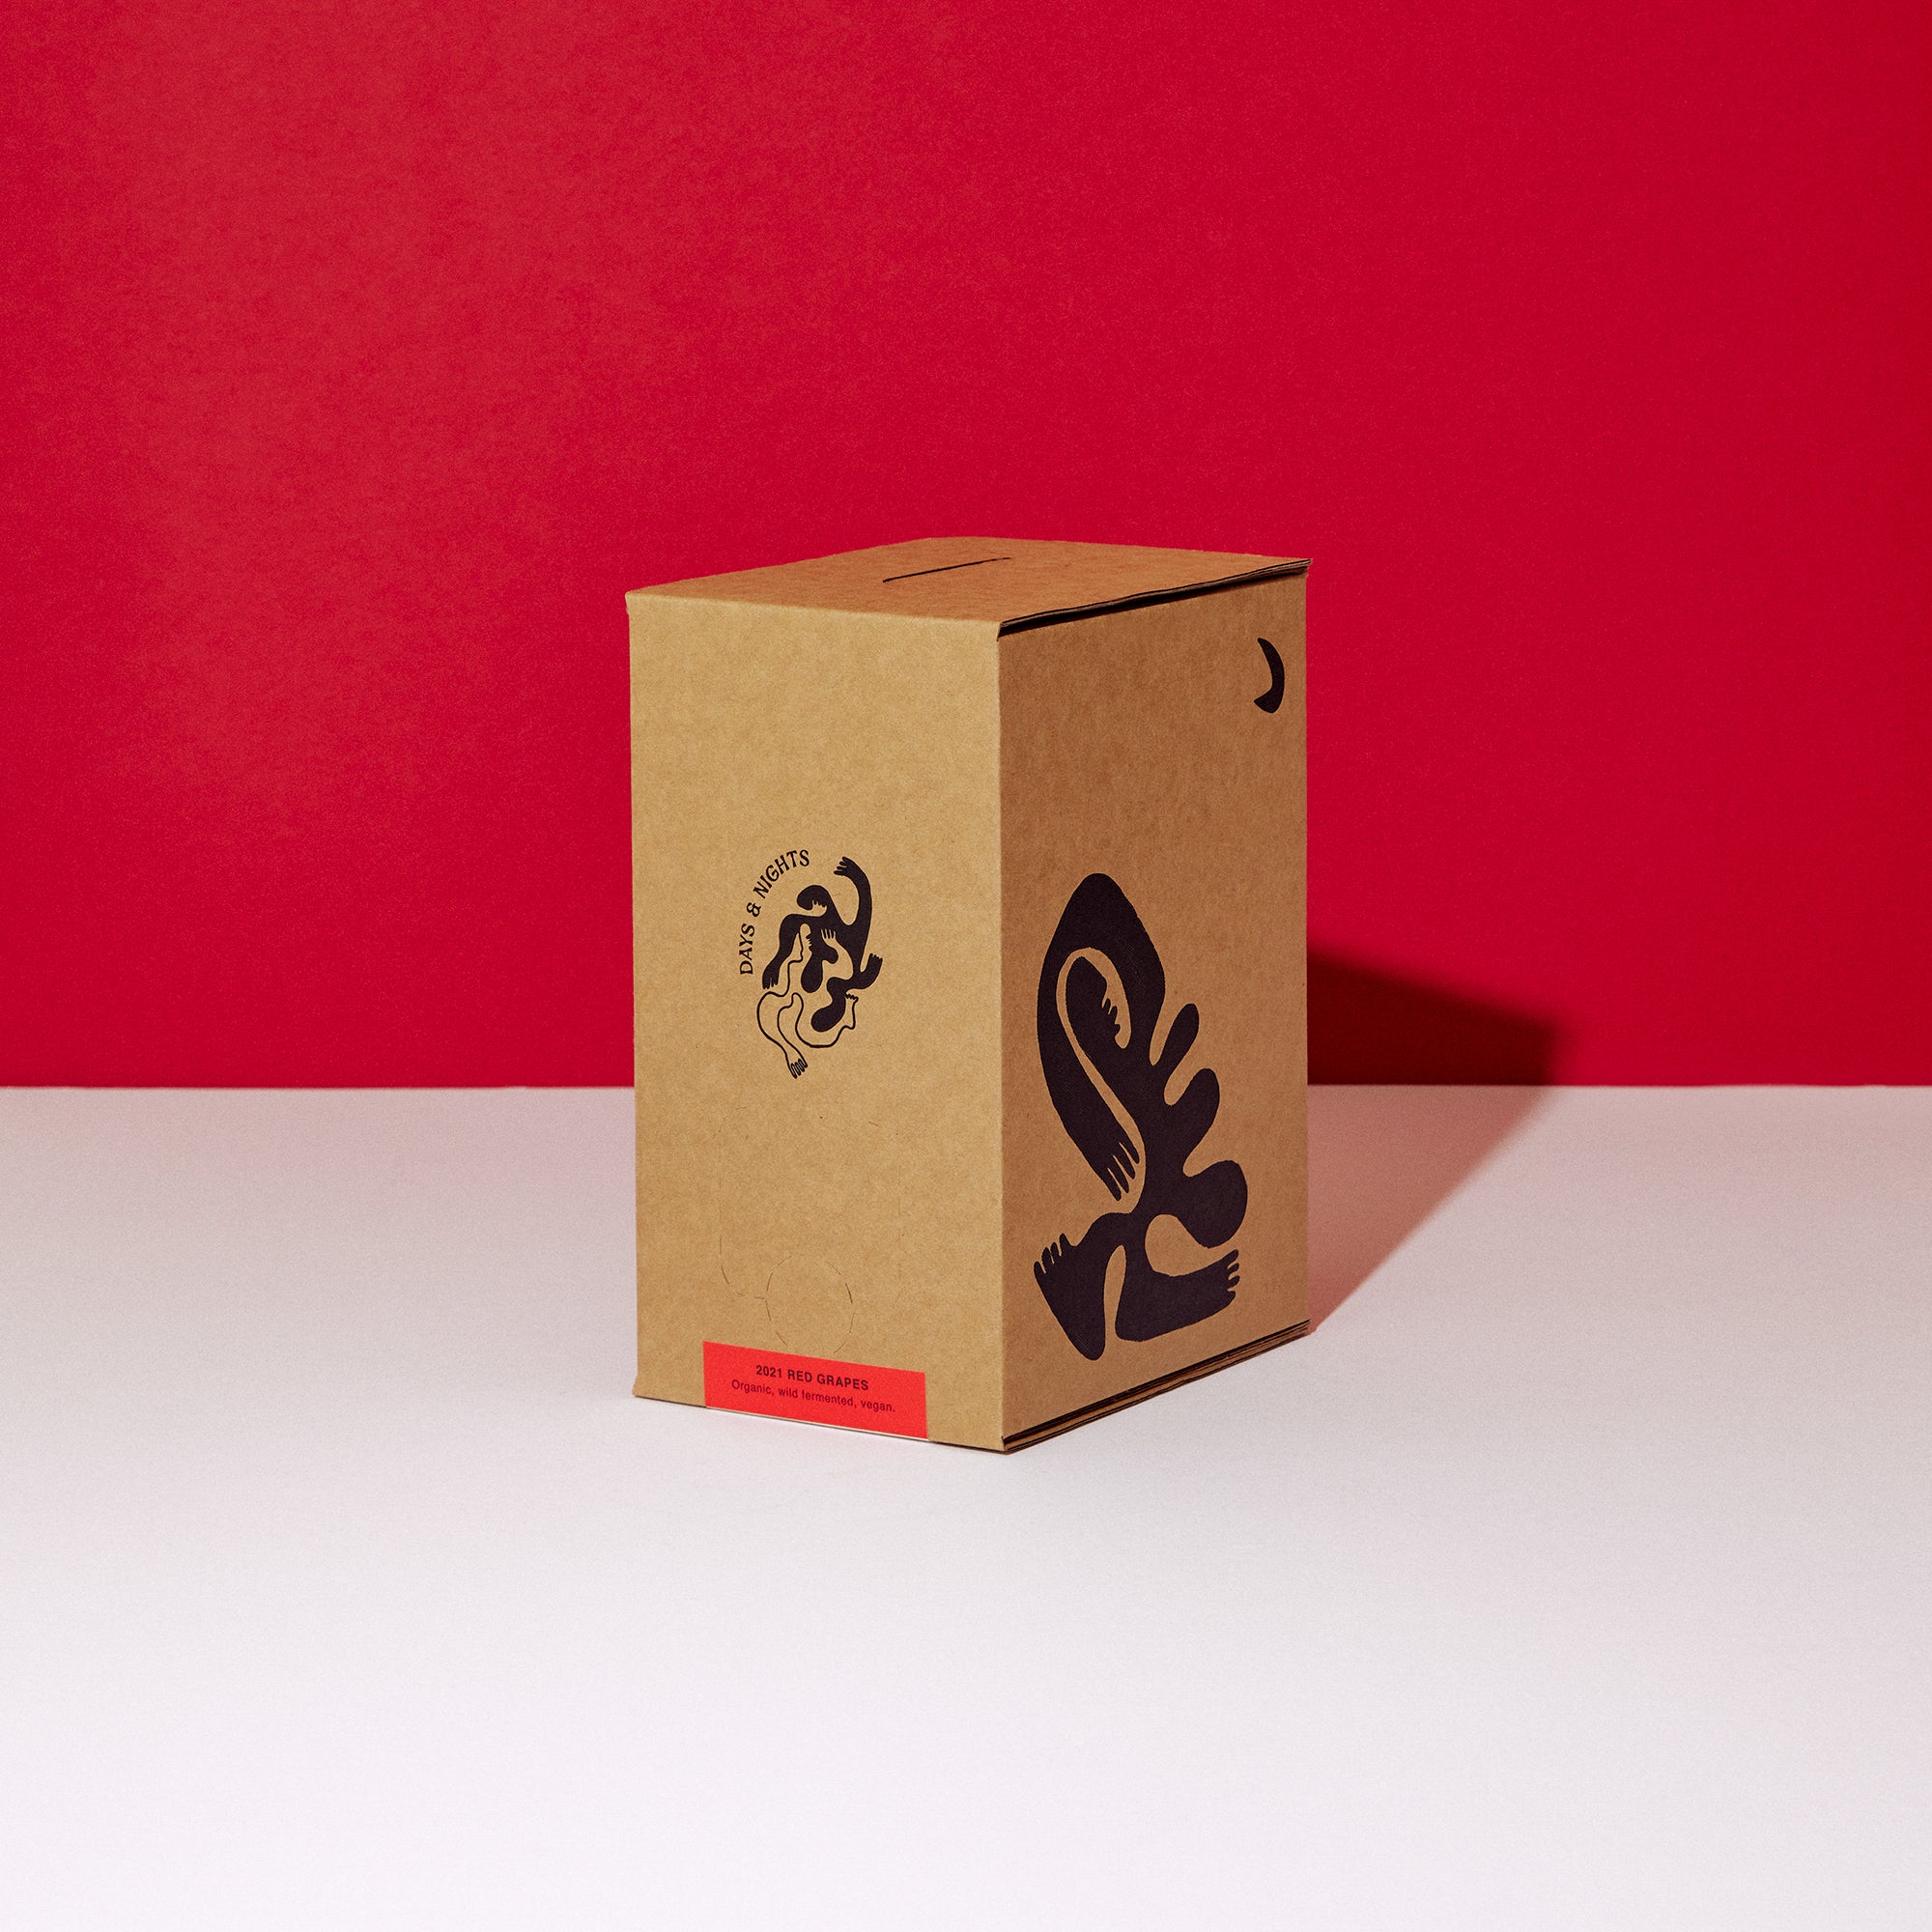 HOW IT STACKS UP: The sustainability of boxed wine.